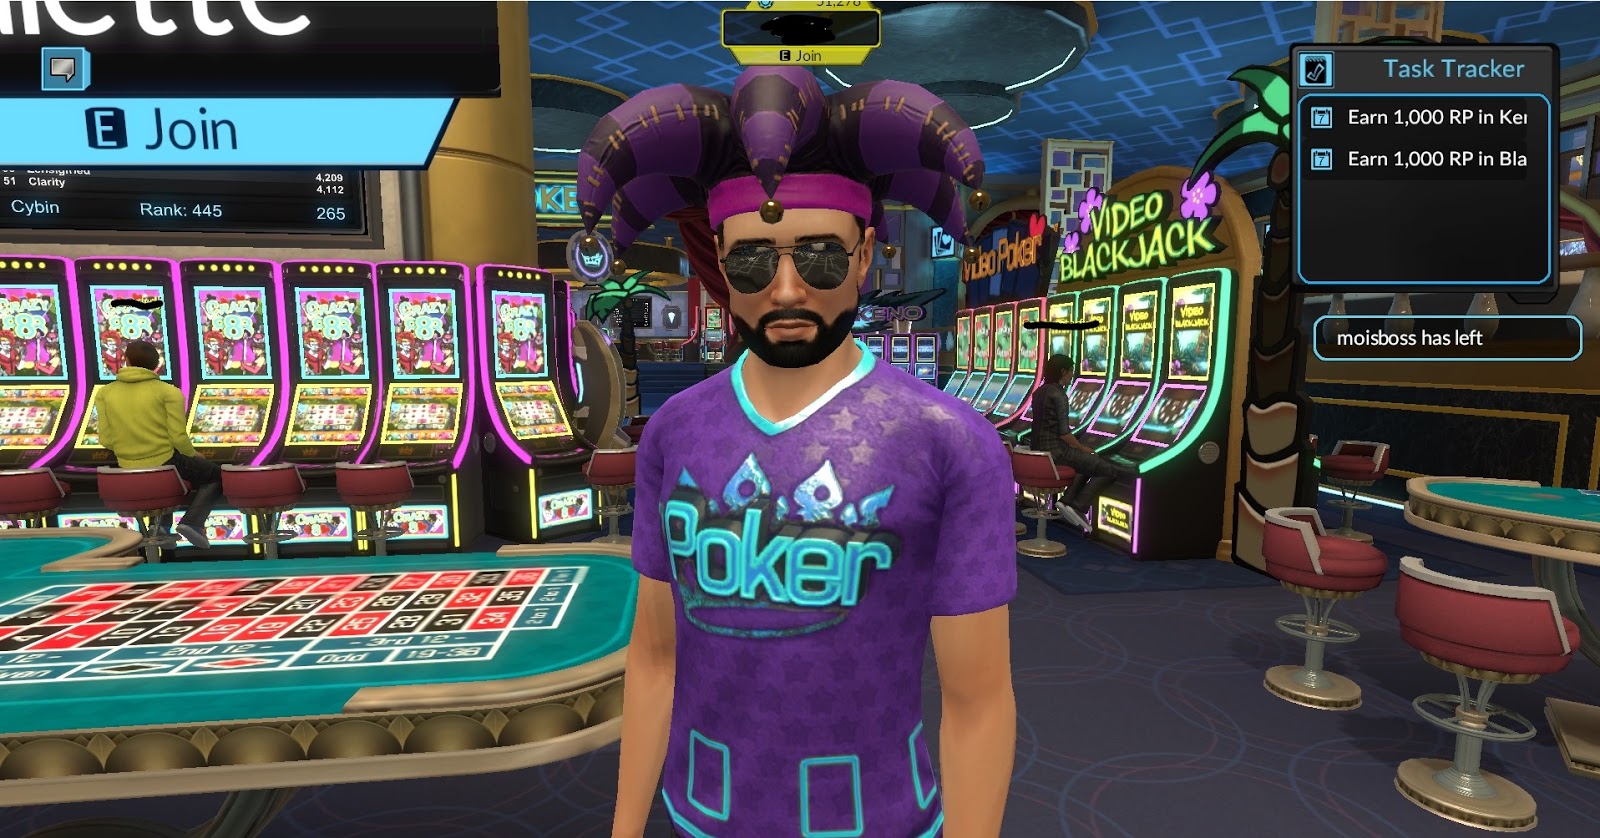 4 Kings Casino And Slots Craps Review